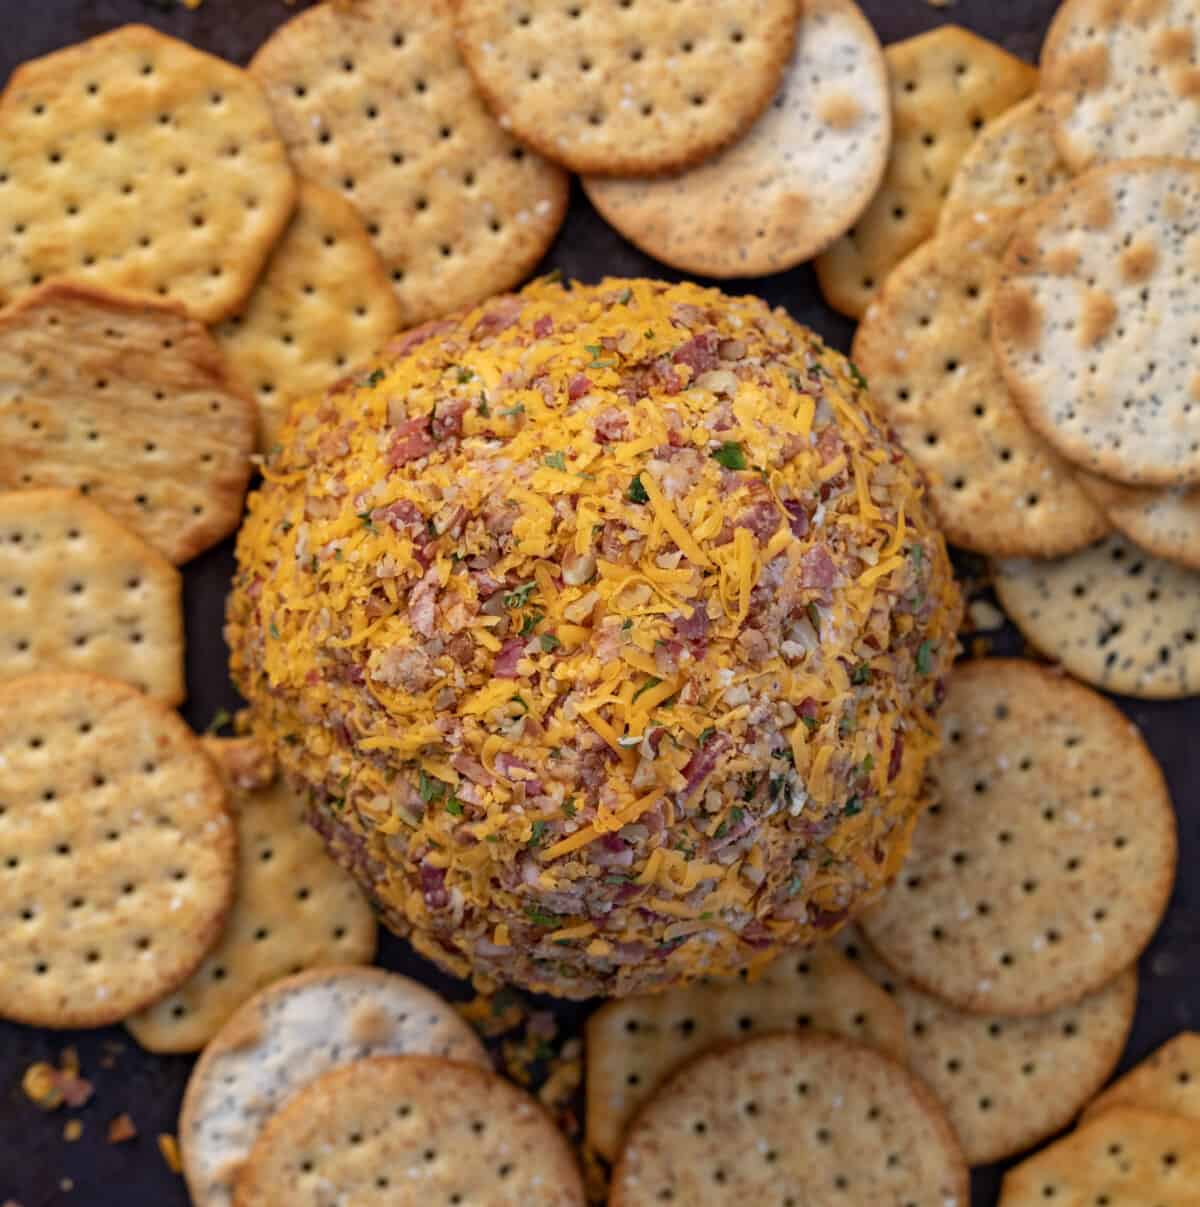 A Classic Cheeseball from Overhead on a Cutting Board Surrounded by Crackers.